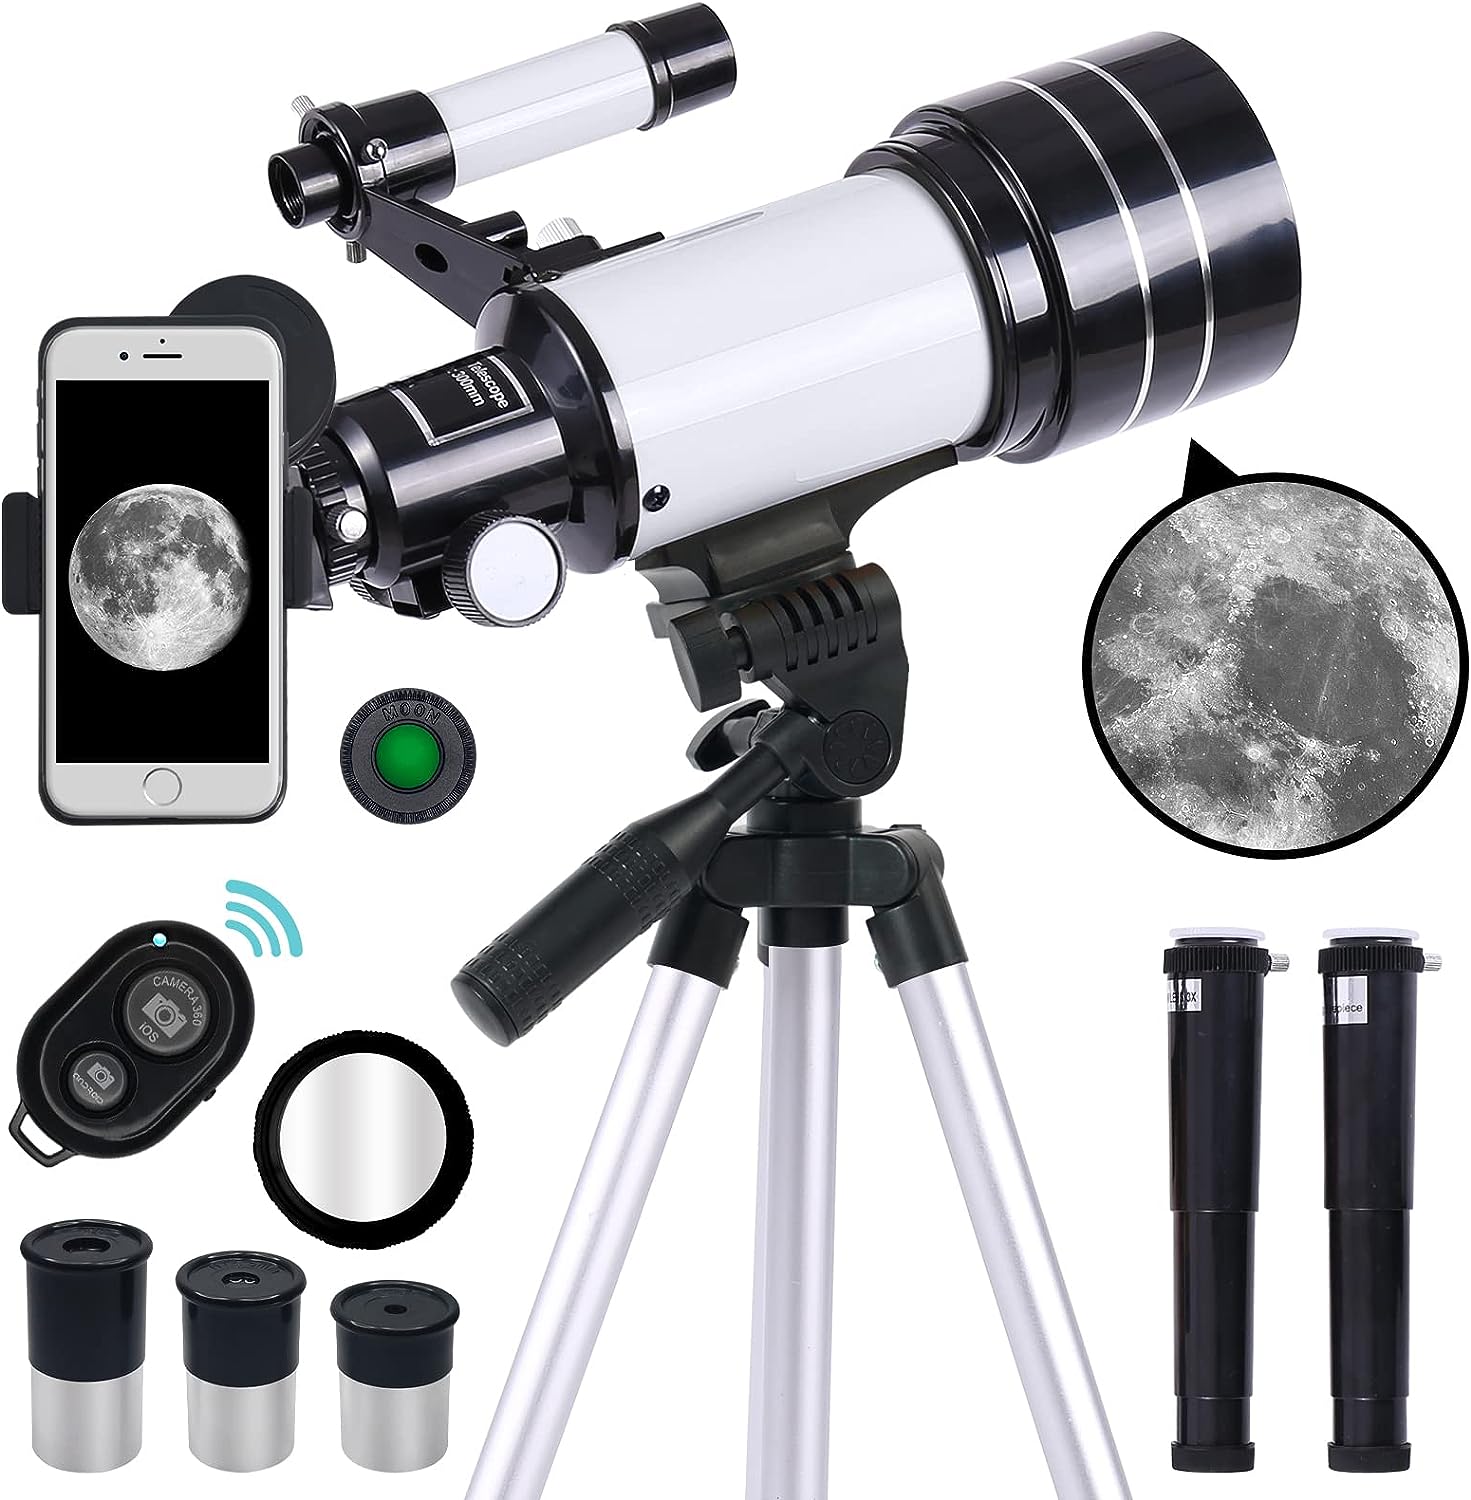 Telescope for Adults & Kids, 300mm Focal Length Refractor Telescope, 70mm Aperture Professional Astronomy Refractor Telescope for Beginners, Phone Adapter & Wireless Remote (White)